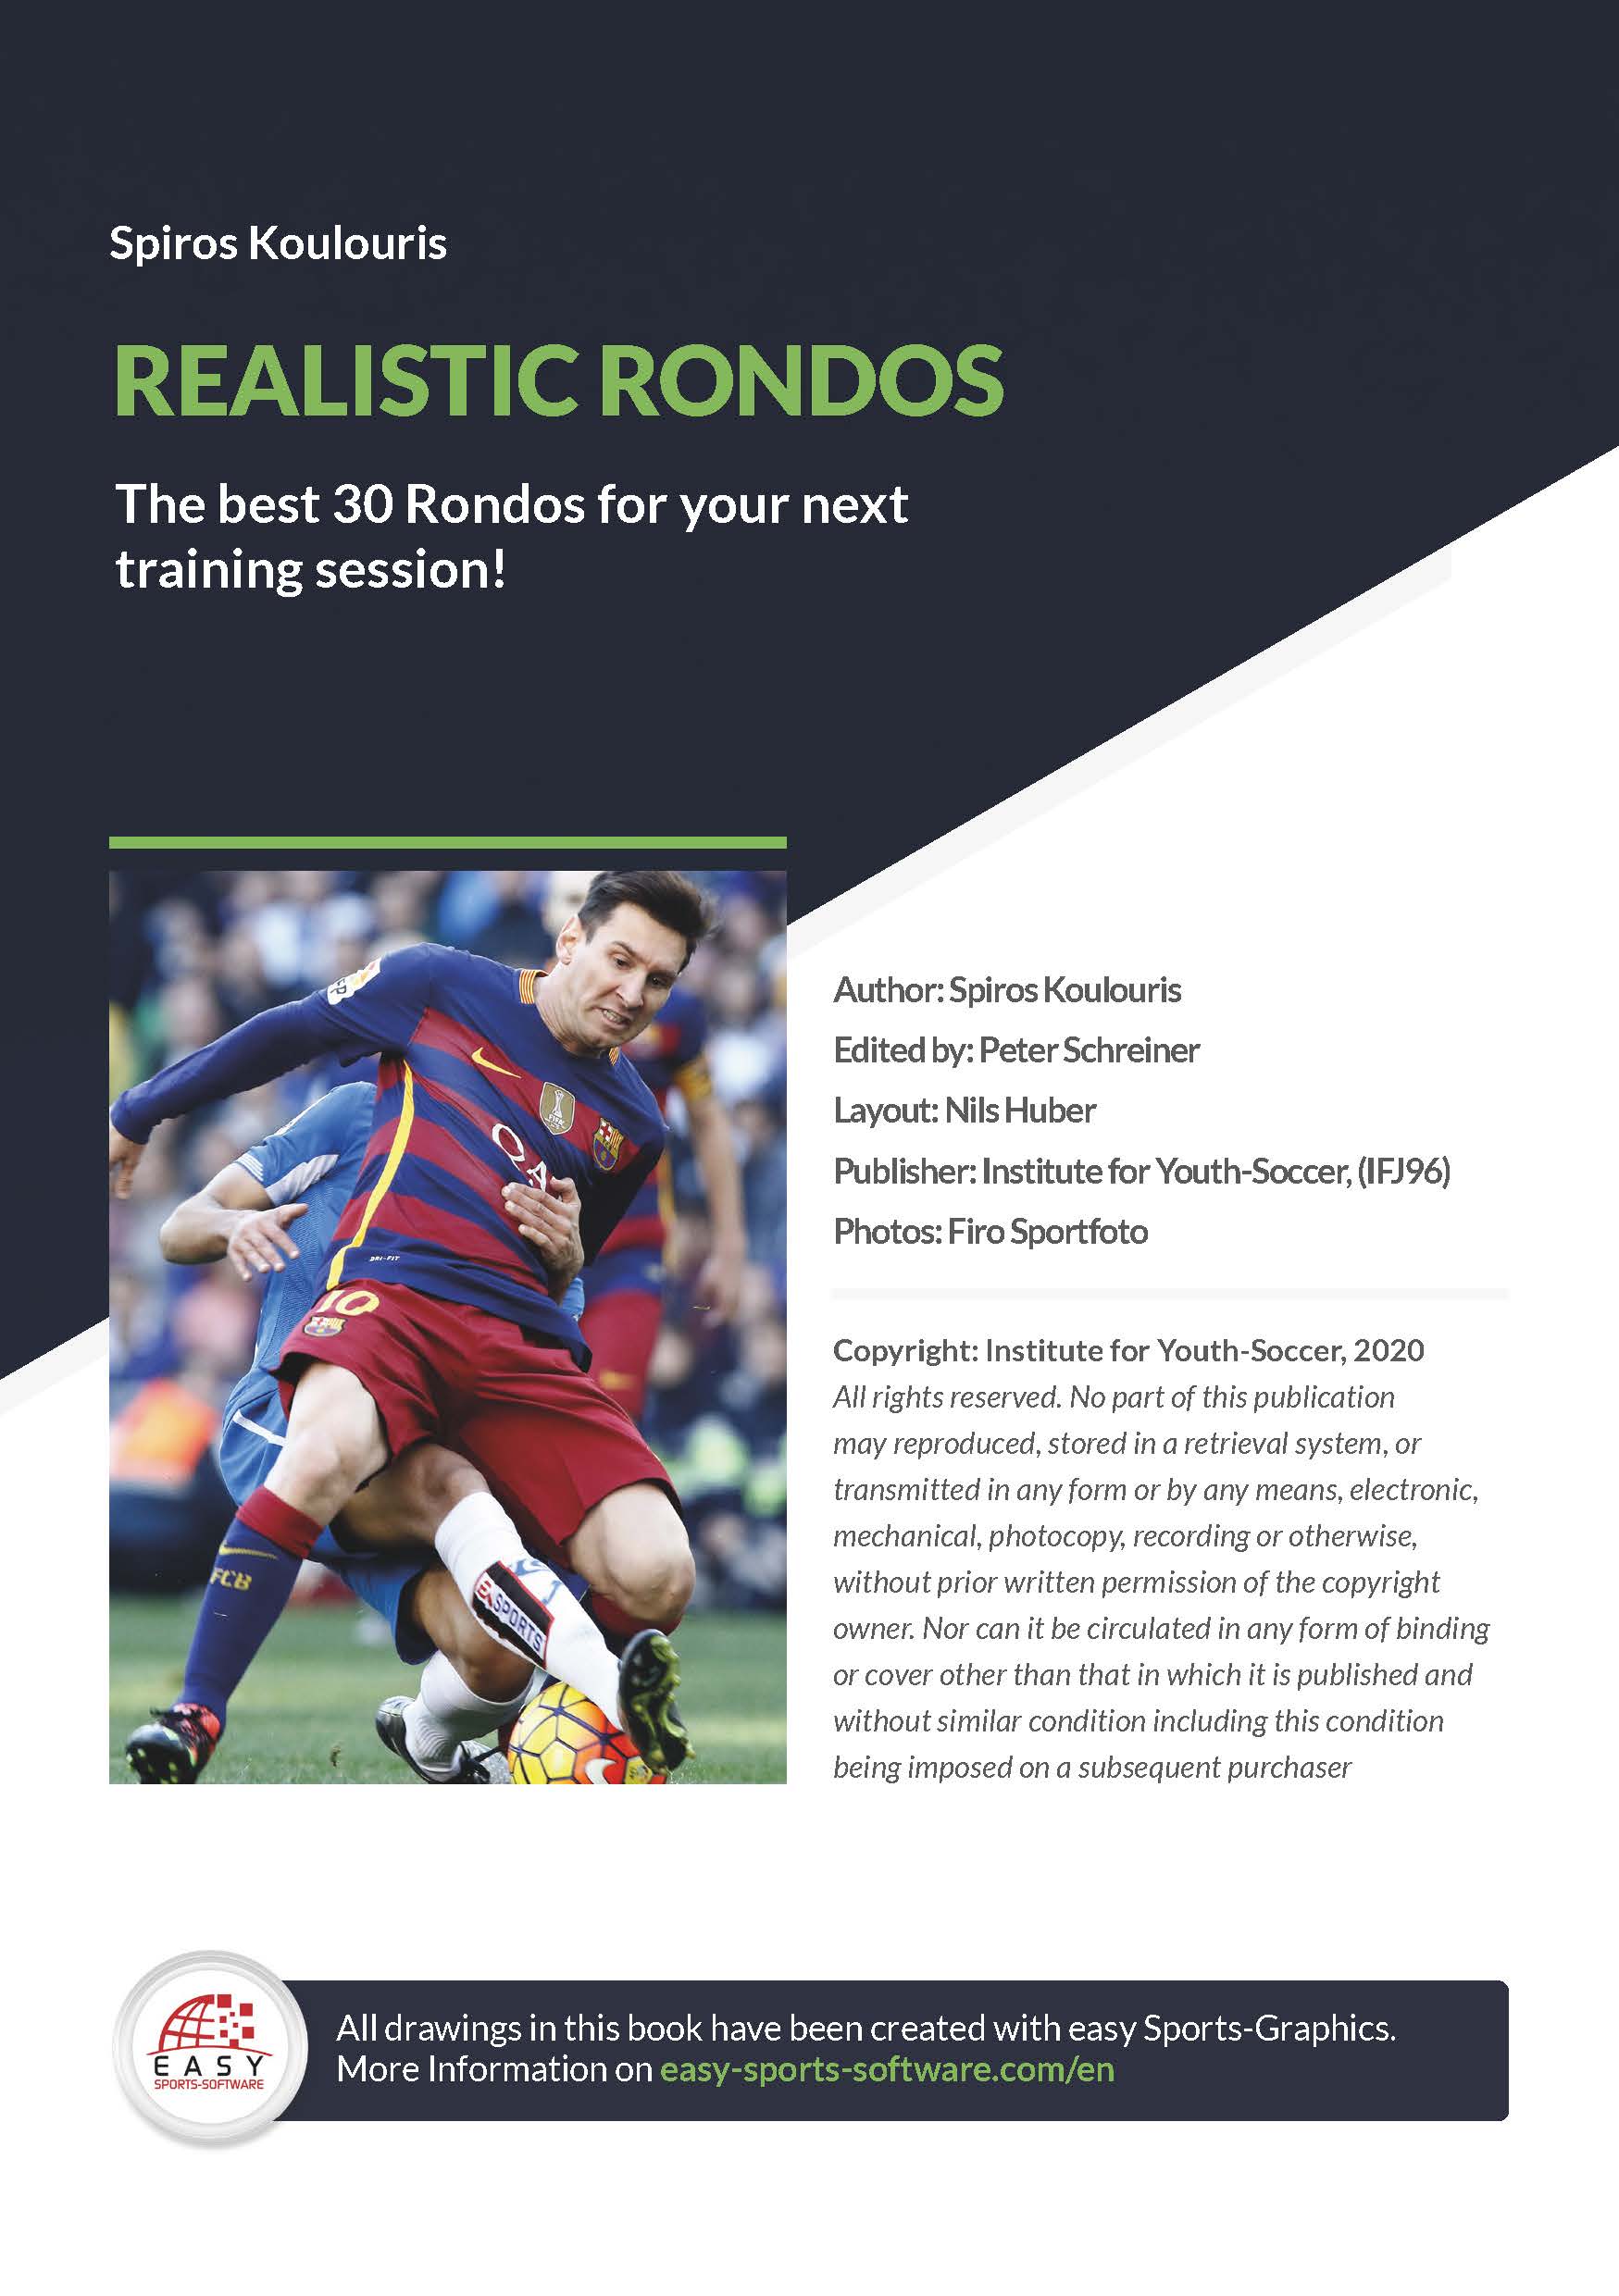 Realistic Rondos (eBook) - The best 30 Rondos for your next training session!